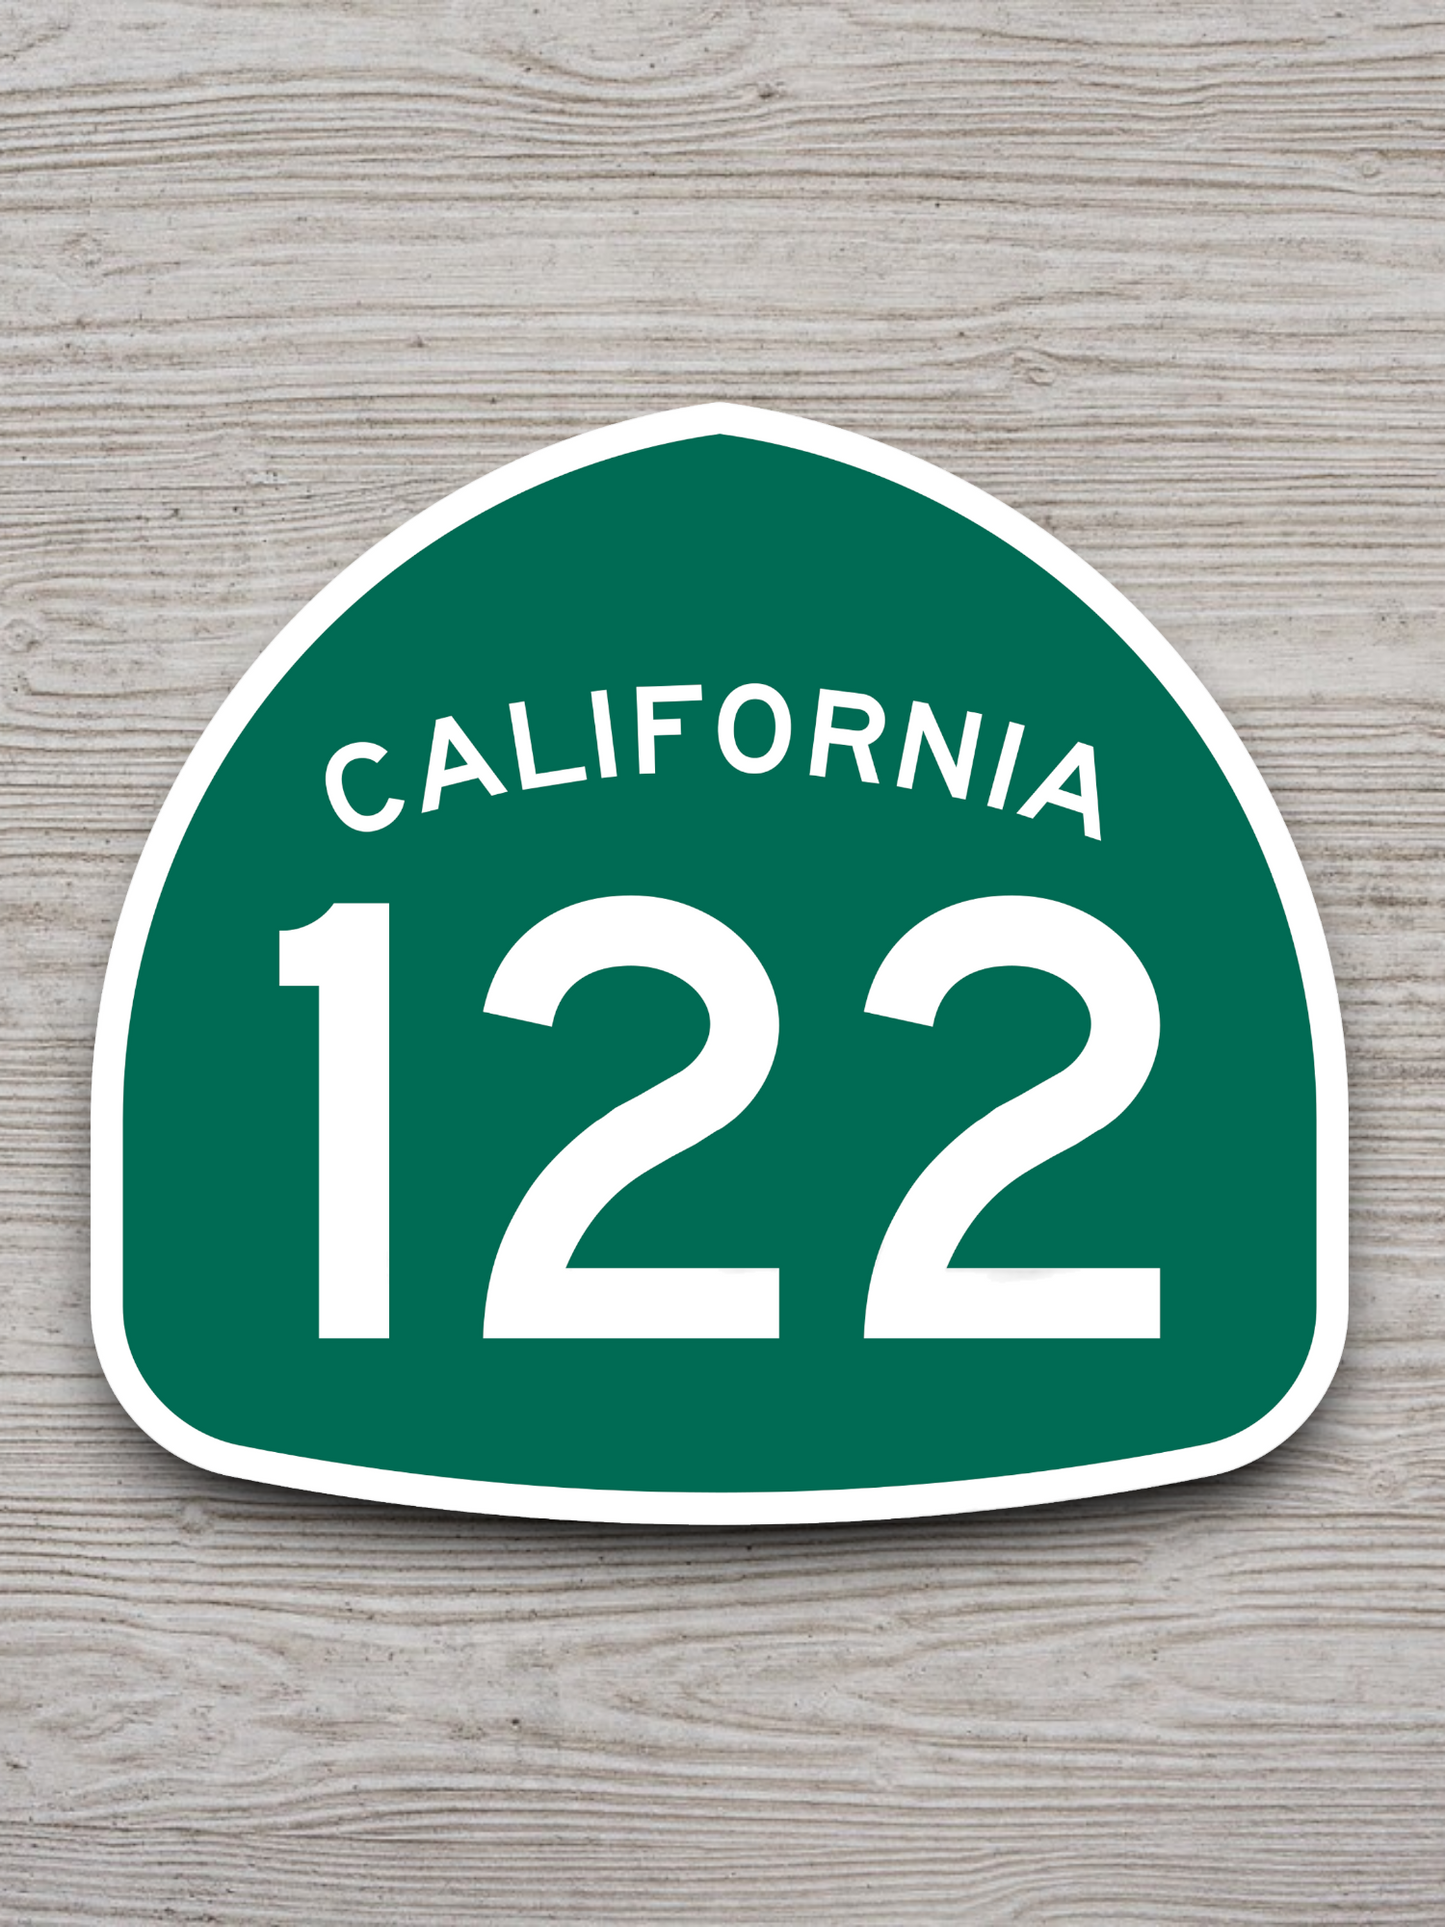 California State Route 122 Road Sign Sticker